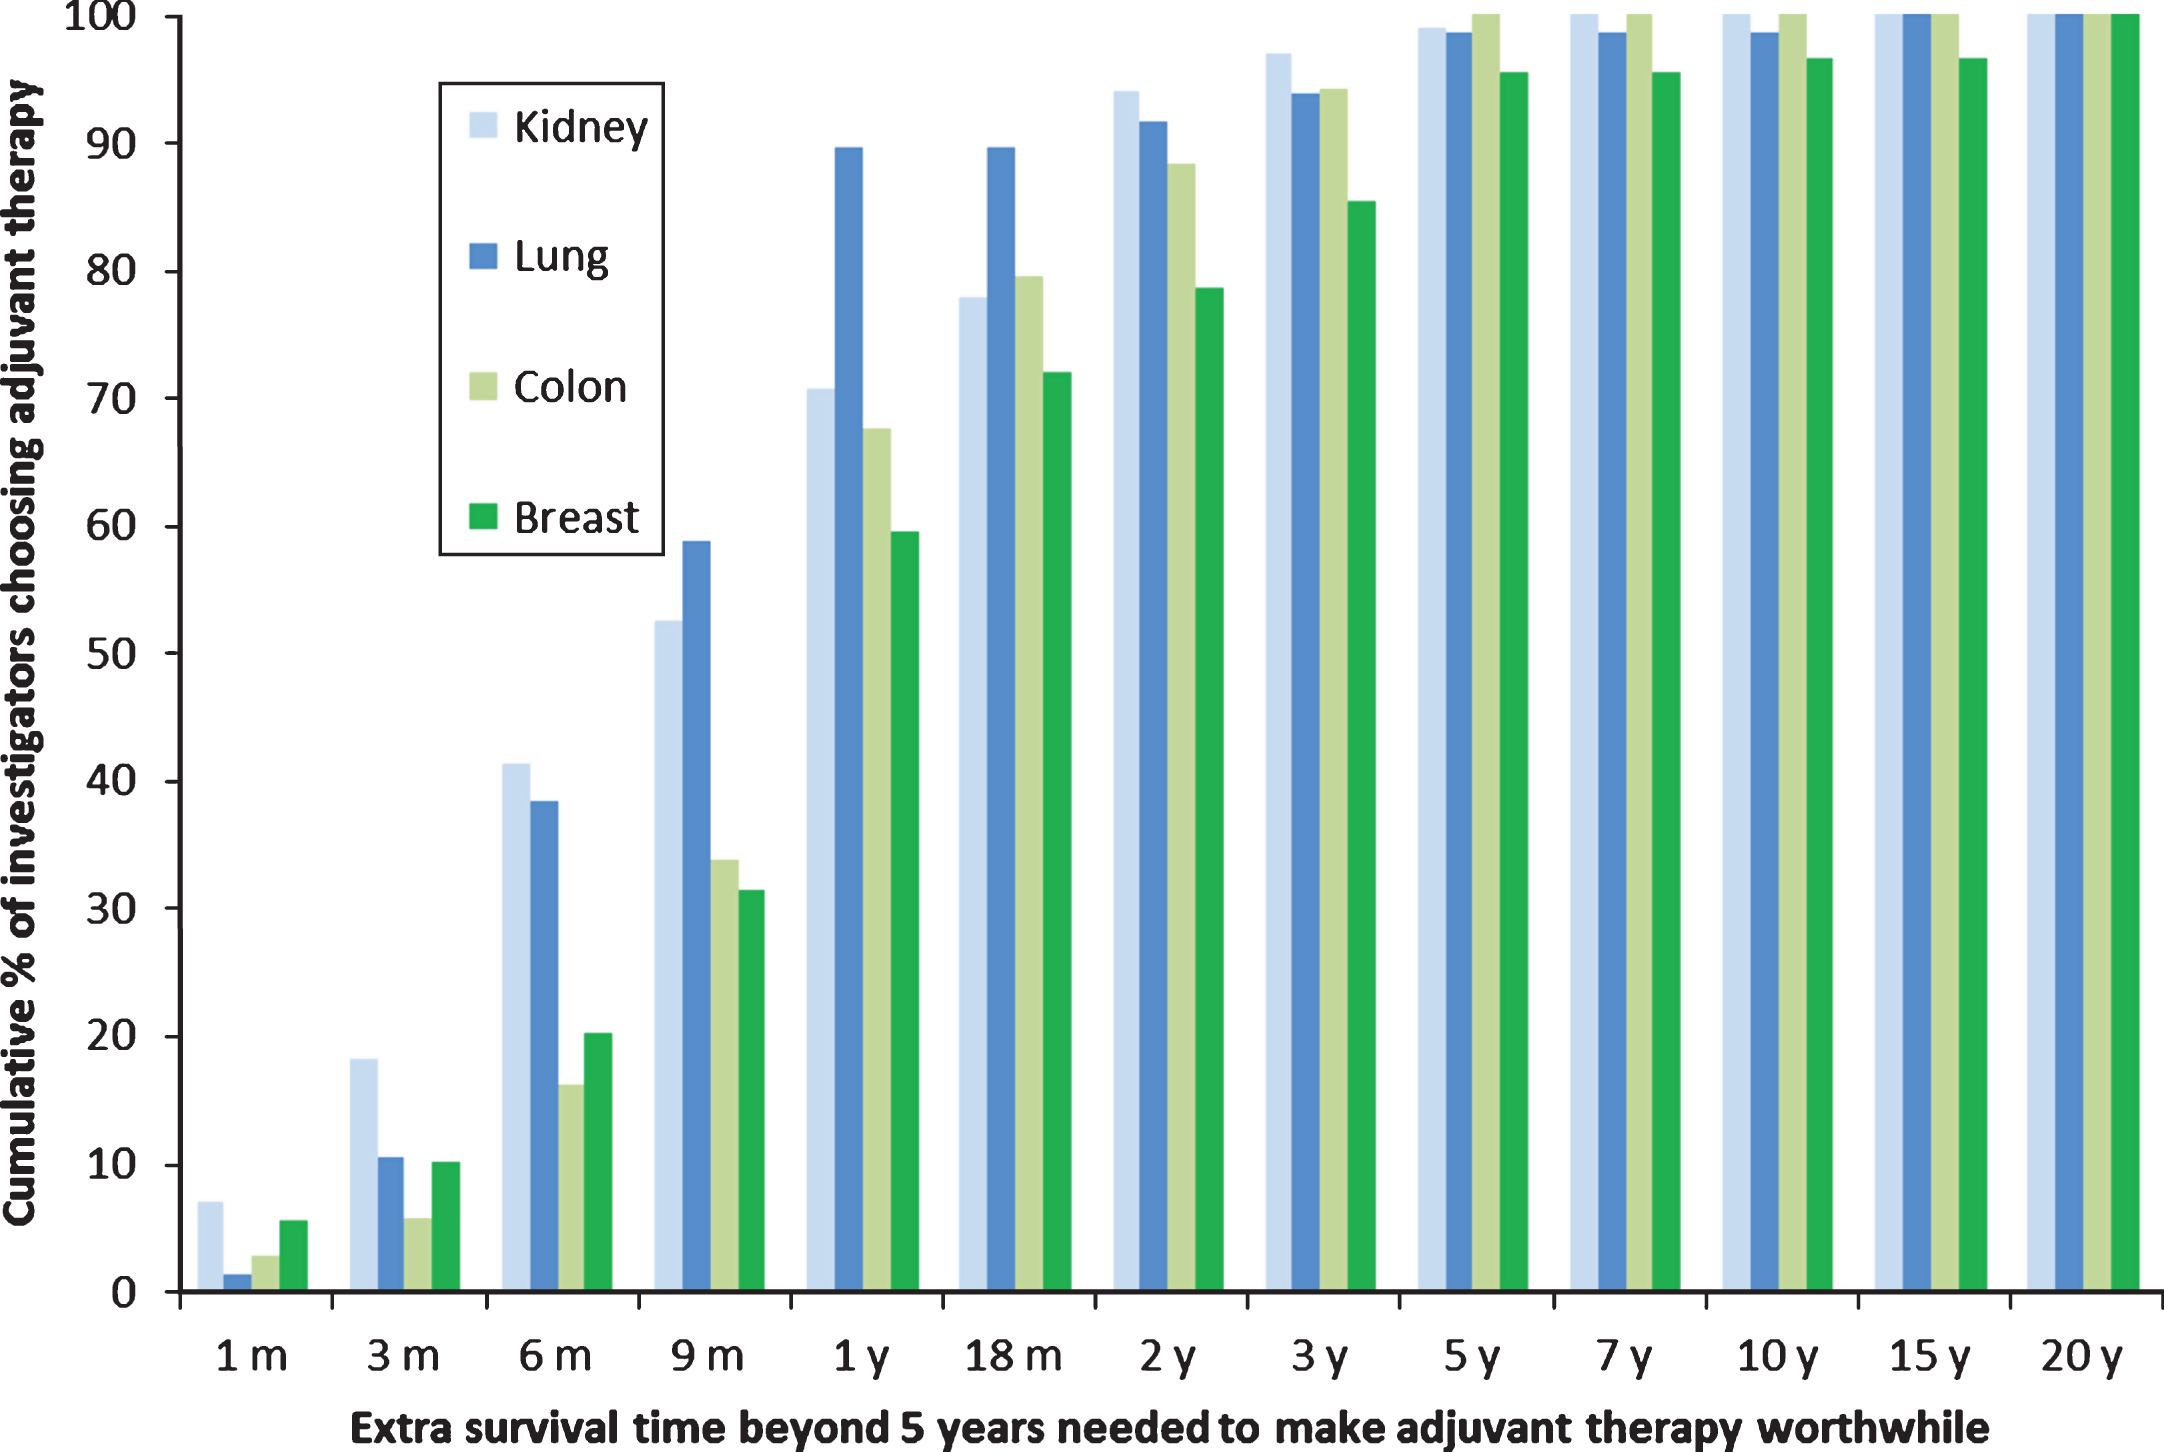 Cumulative proportions of different clinicians who treat kidney, lung, colon or breast cancer judging specified benefits in overall survival sufficient to warrant adjuvant therapy given a baseline survival time of 5 years without adjuvant therapy. The types of cancer and adjuvant therapy were: kidney, 1 year of sorafenib; colon, 6 months of FOLFOX; breast, 6 months of AC and CMF; and lung, 3 months of cisplatin and vinorelbine.